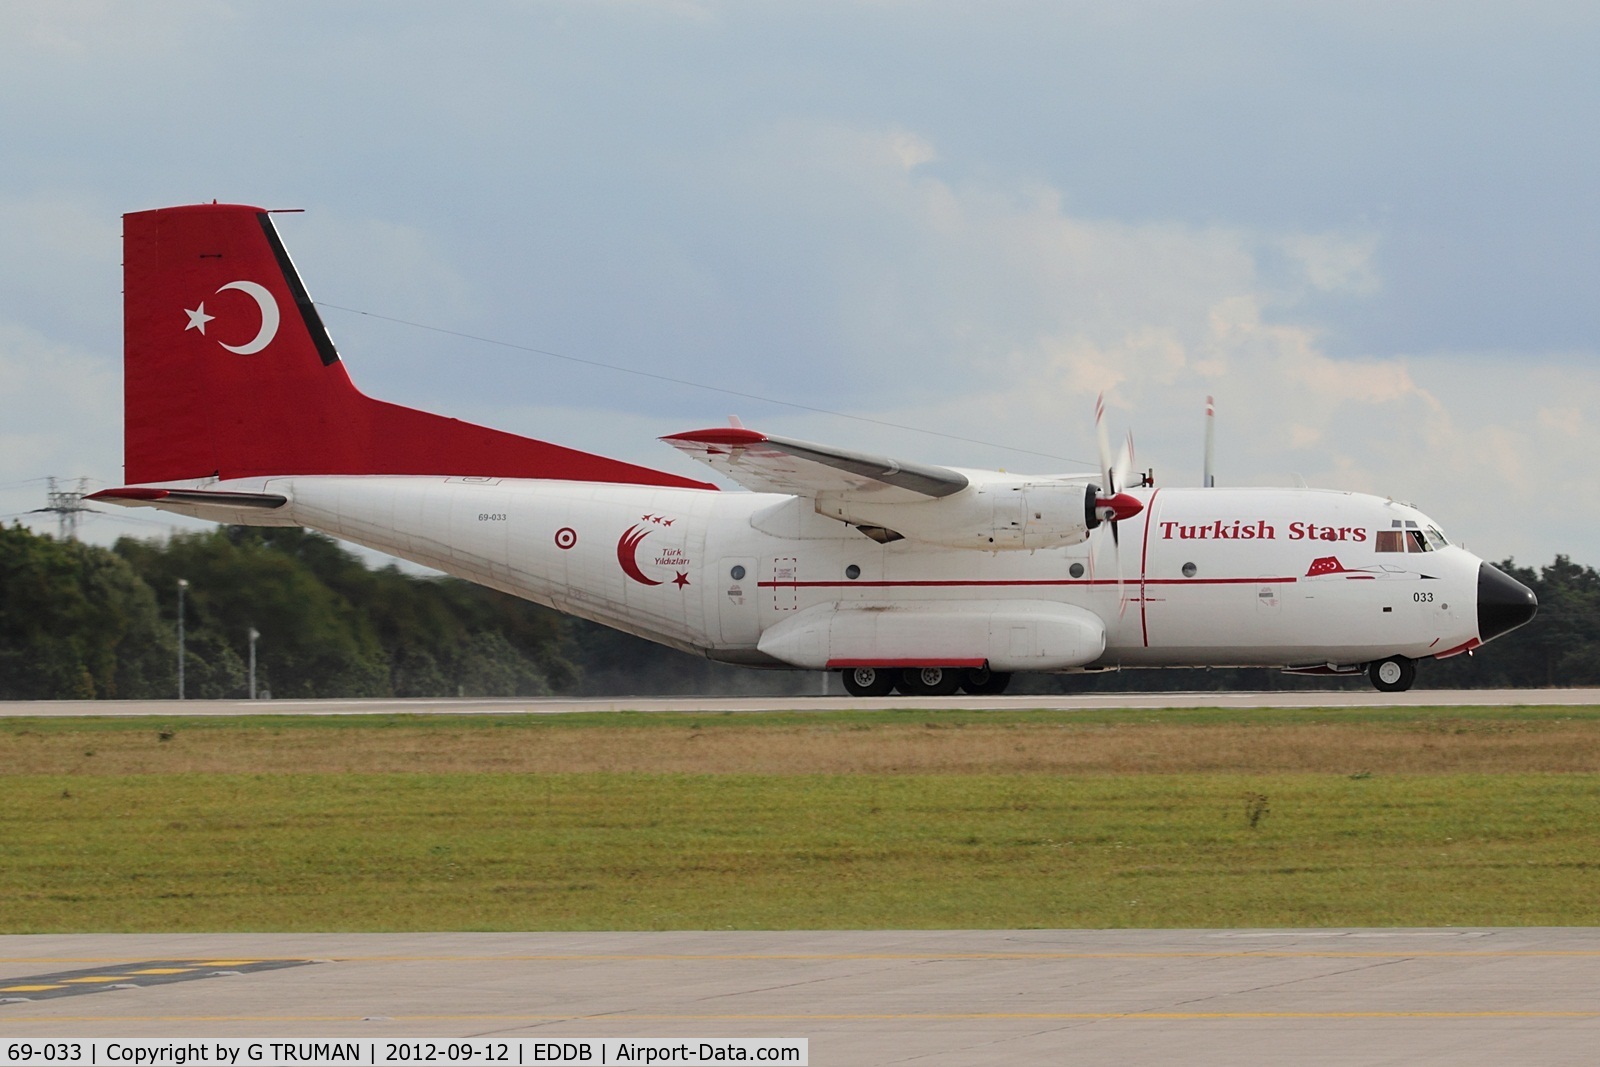 69-033, Transall C-160D C/N D33, Arriving at ILA 2012 as part of the Turkish Stars team